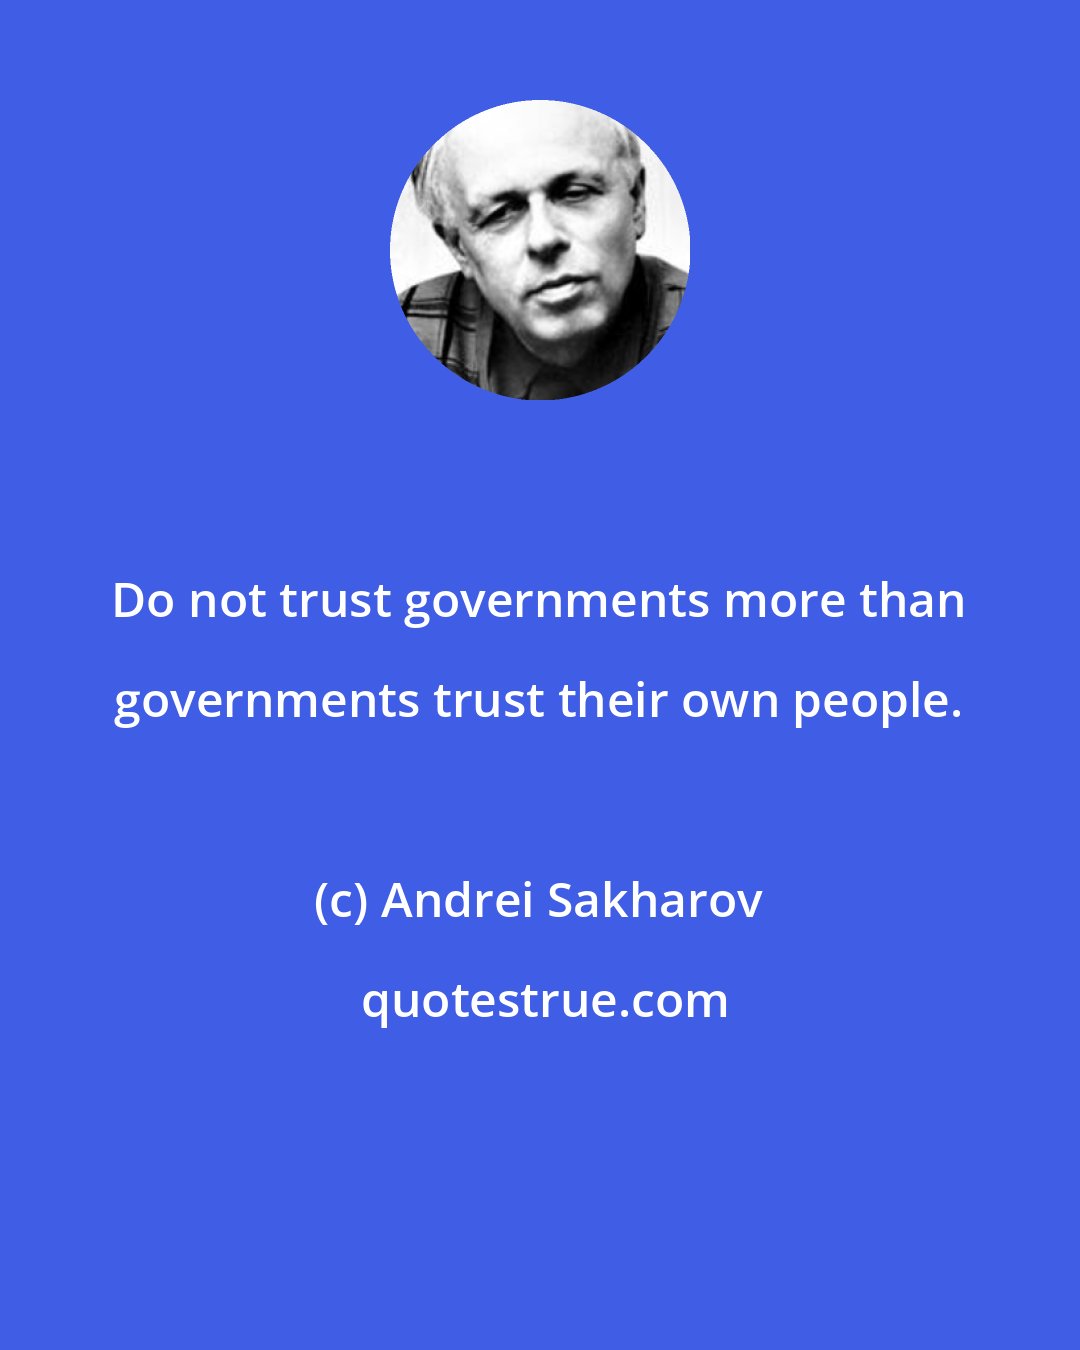 Andrei Sakharov: Do not trust governments more than governments trust their own people.